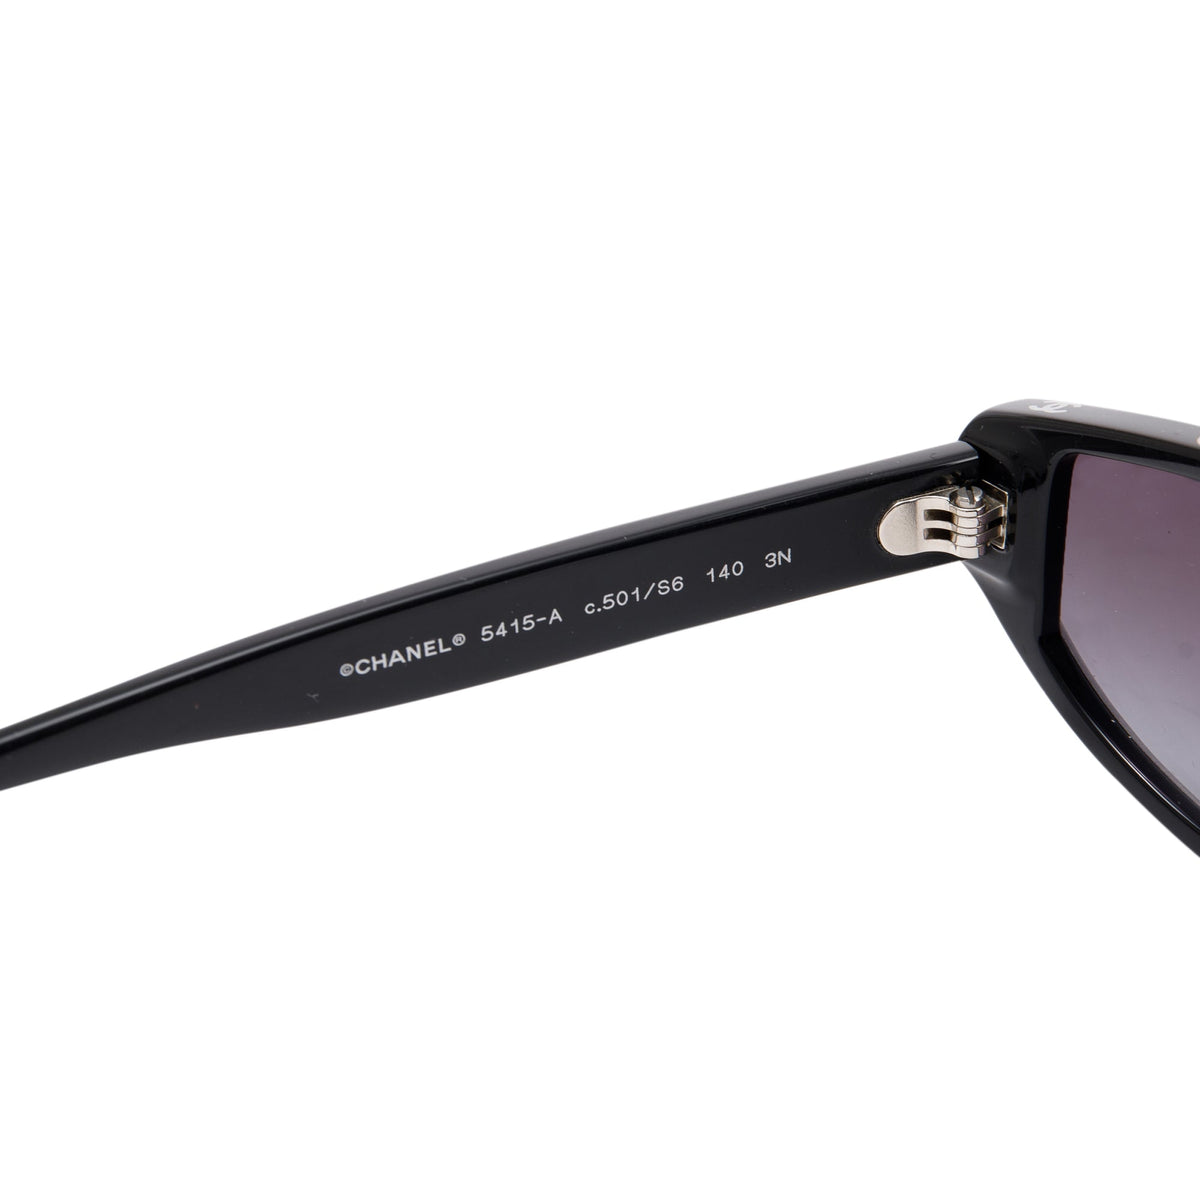 Shop Chanel 5415-A CC Logo Oval Sunglasses w/ Box & Case Chanel and save big!  Find the lowest prices on the most popular products